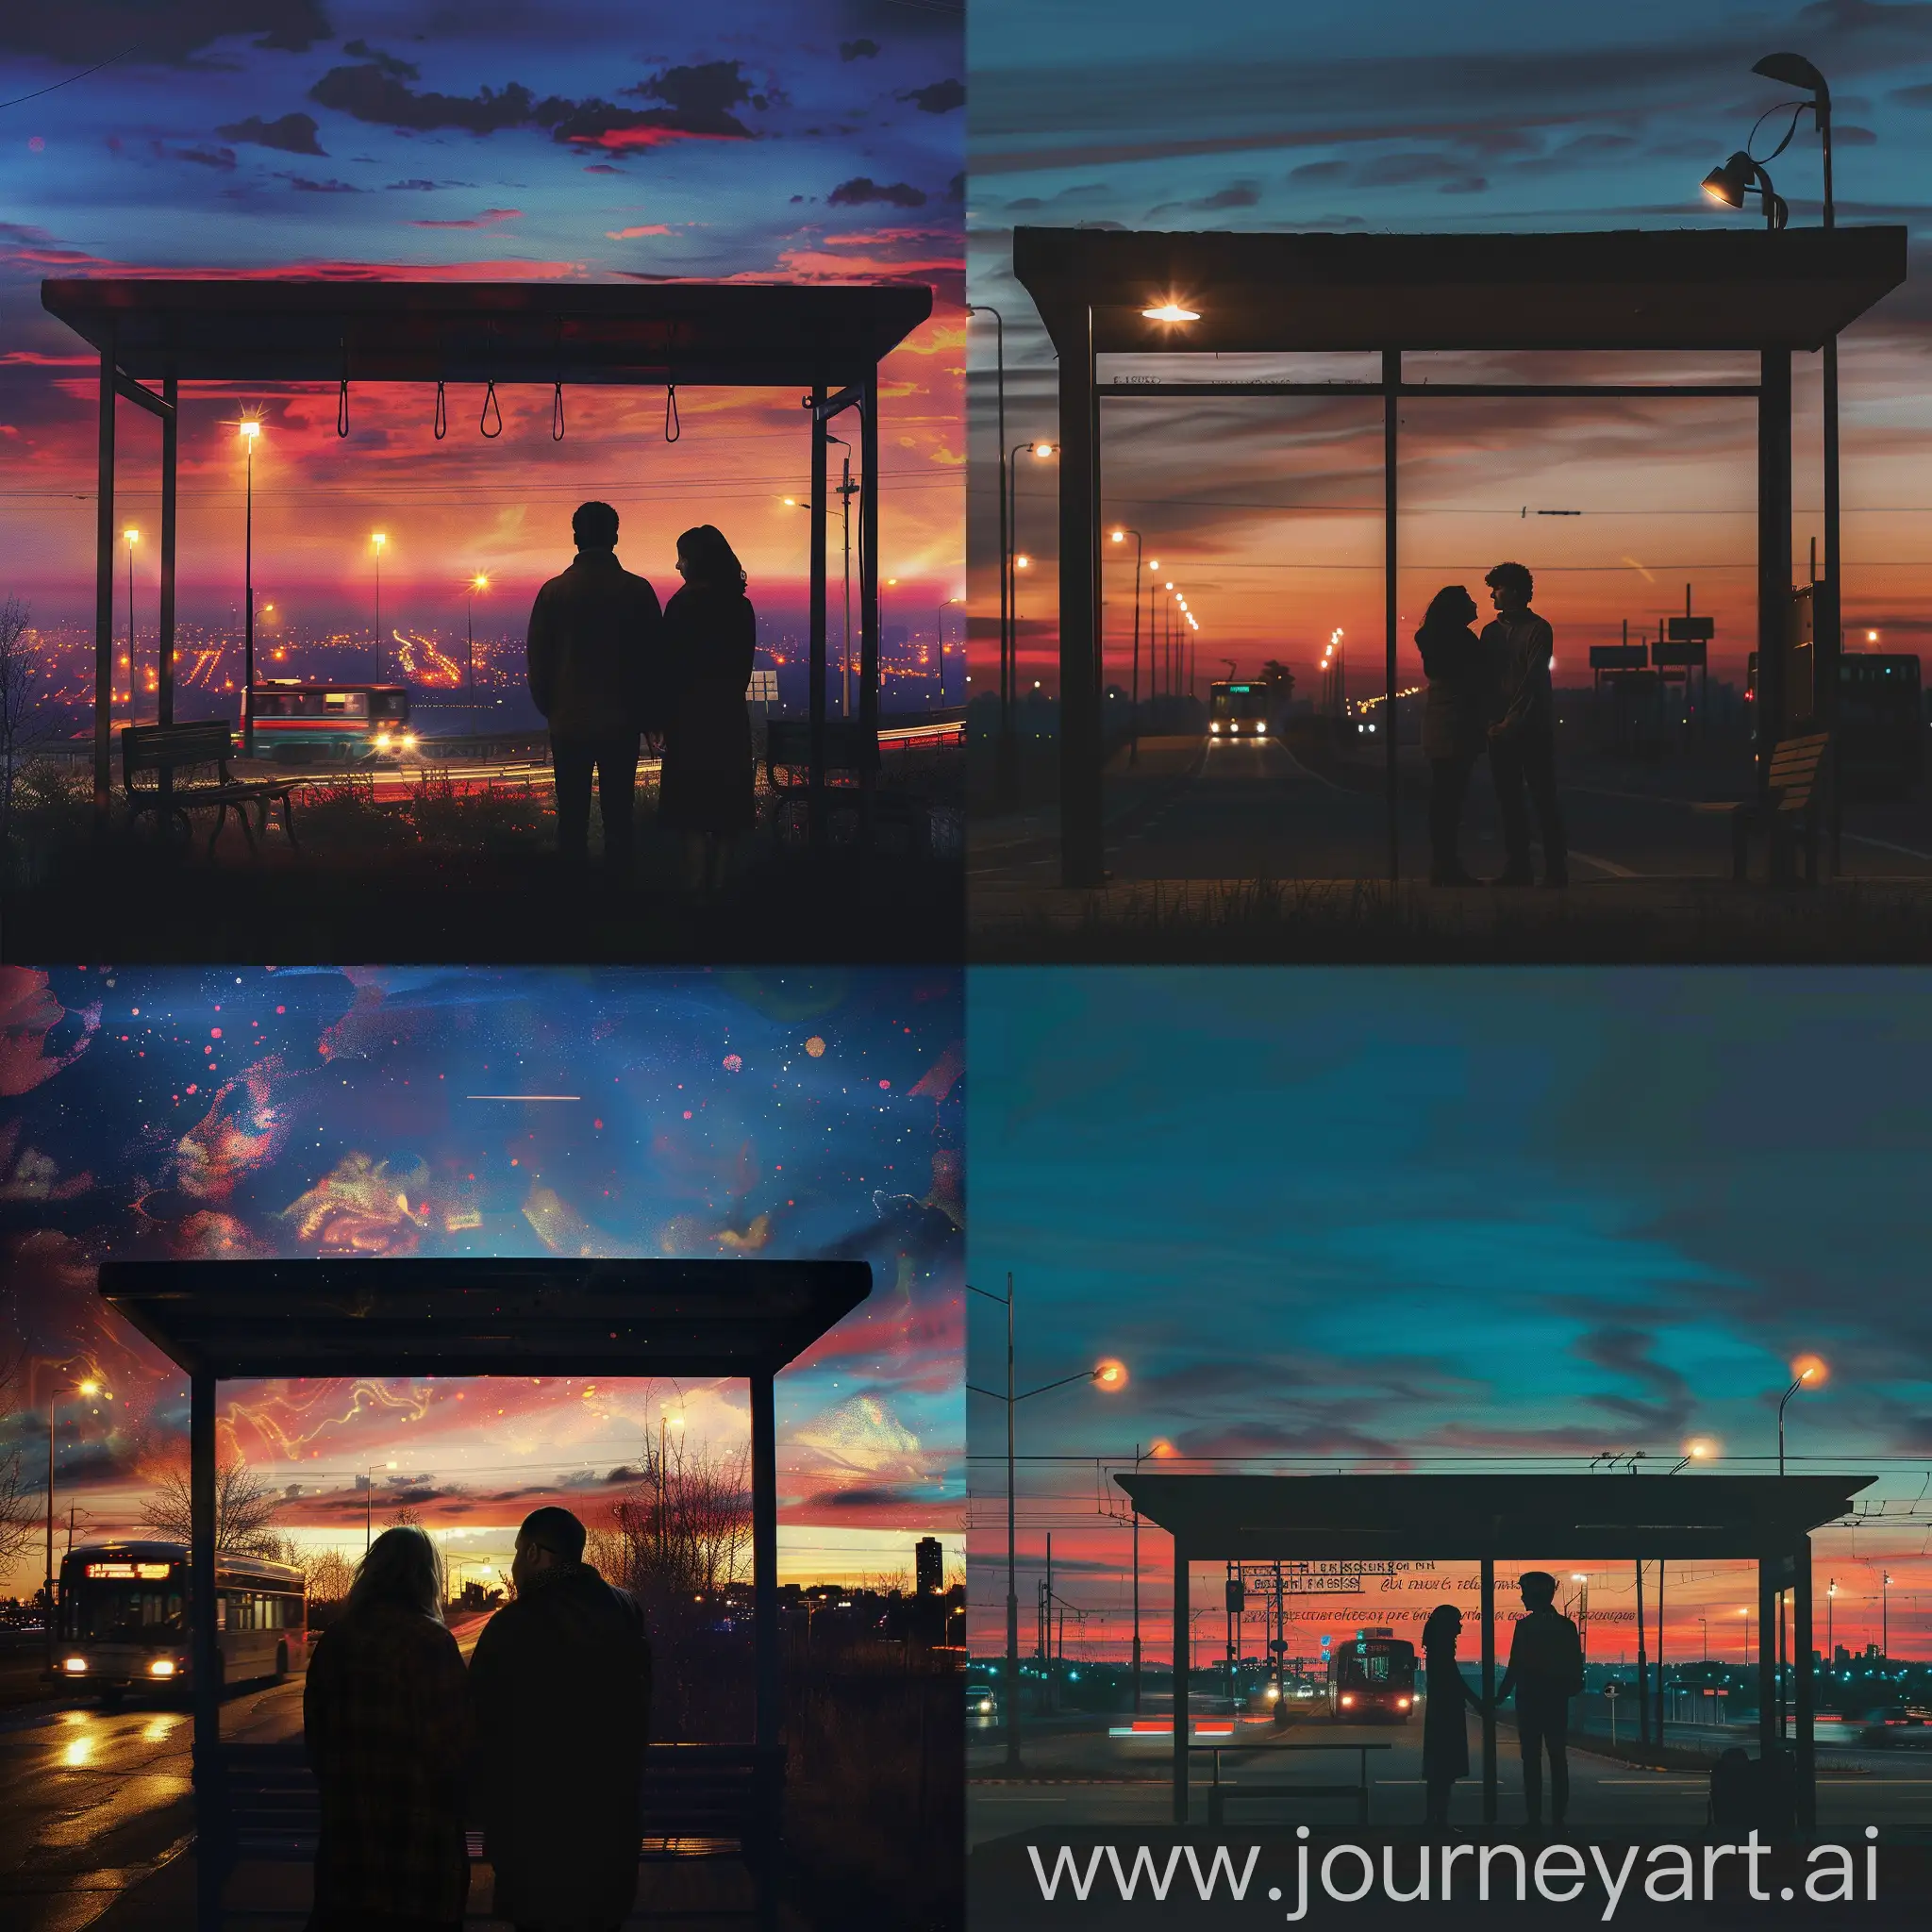 old photo:
A bus stop illuminated by the last lights of the sunset, with two people standing in front of it. The city lights, street lamps, and color transitions in the sky convey the emotions described in the poem. Hands tightly clasped, emphasize the connection between the couple as they gaze towards the sky. A bus departing from the bus stop, the silhouette of the city, and distant roads fading away symbolize a journey towards the next stop. Choose a warm color palette to reflect romance and warmth.